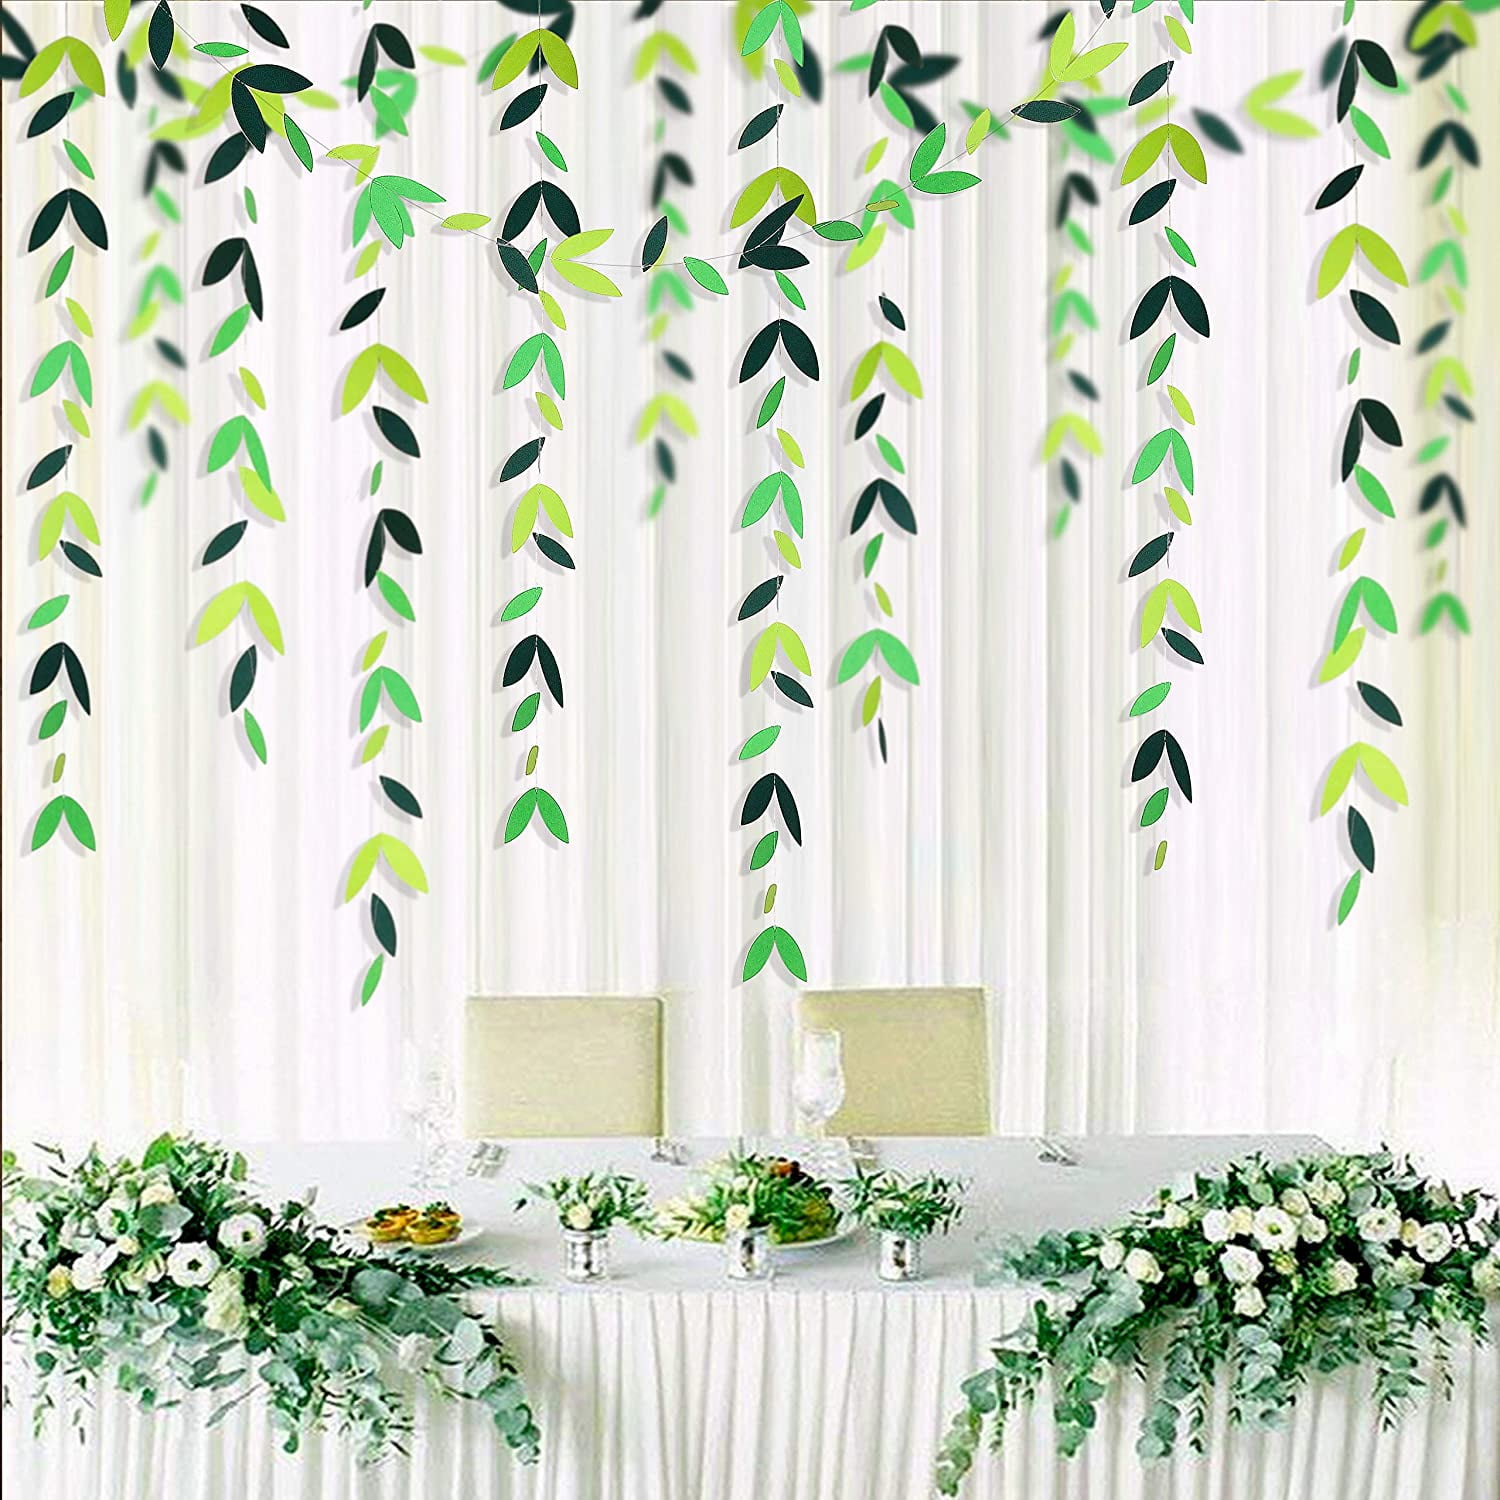 52Ft Iridescent Leaf Garland Holographic Paper Colorful Hanging Leaves Streamer Bunting Banner for Birthday Baby Shower Wedding Engagement Bridal Shower Bachelorette Holiday Party Decoration Supplies 